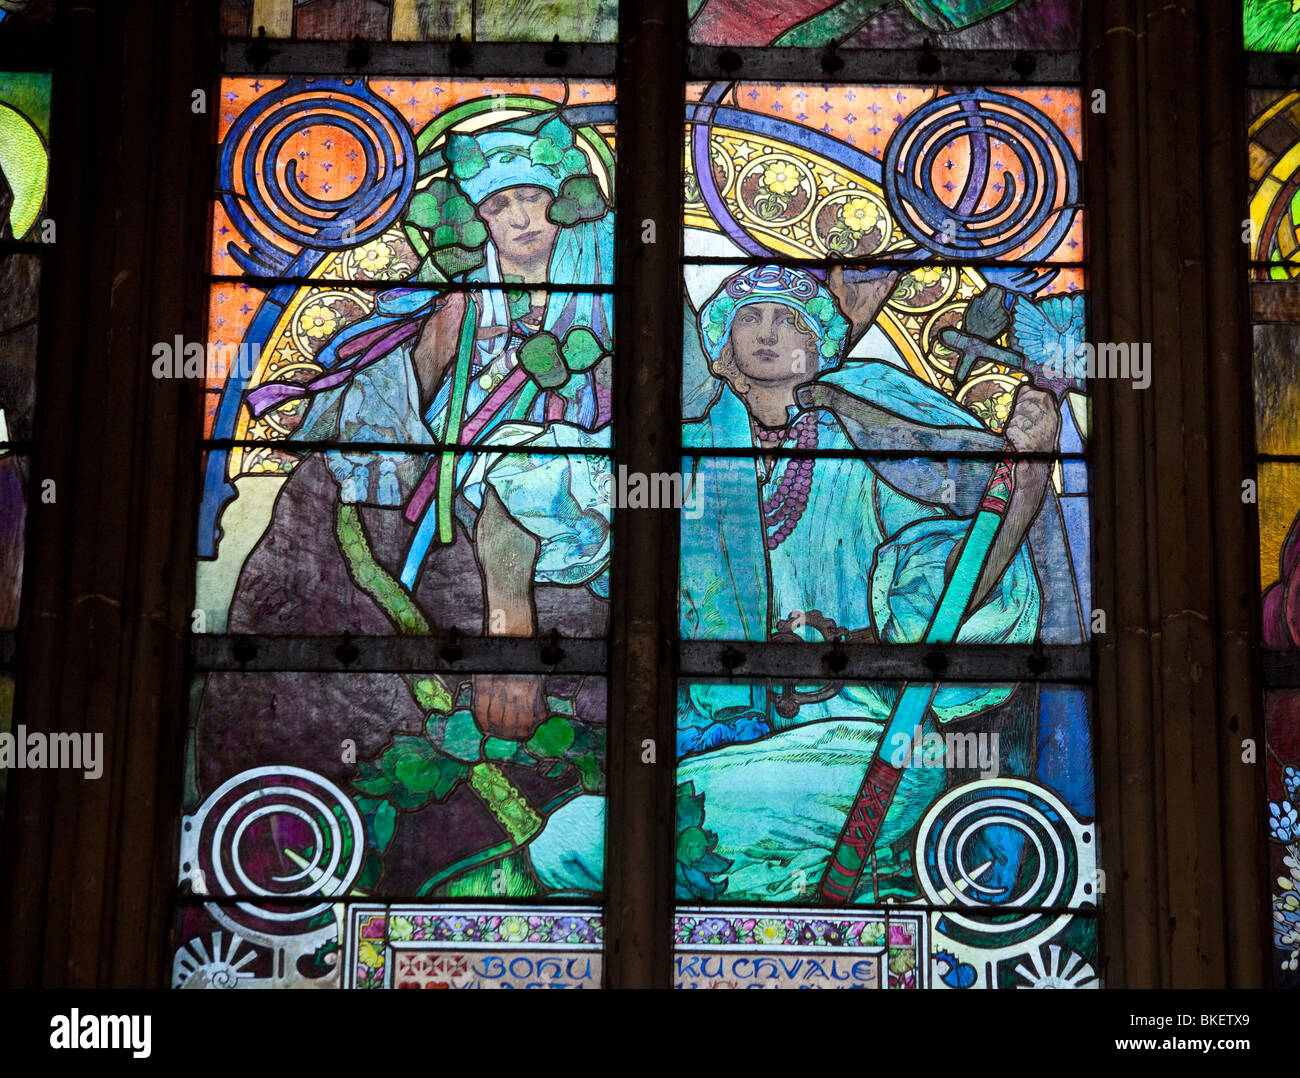 detail of window of Alfons Mucha showing Sts Cyril and Methodius, Saint Vitus's Cathedral, Prague castle, Prague, Czech Republic Stock Photo